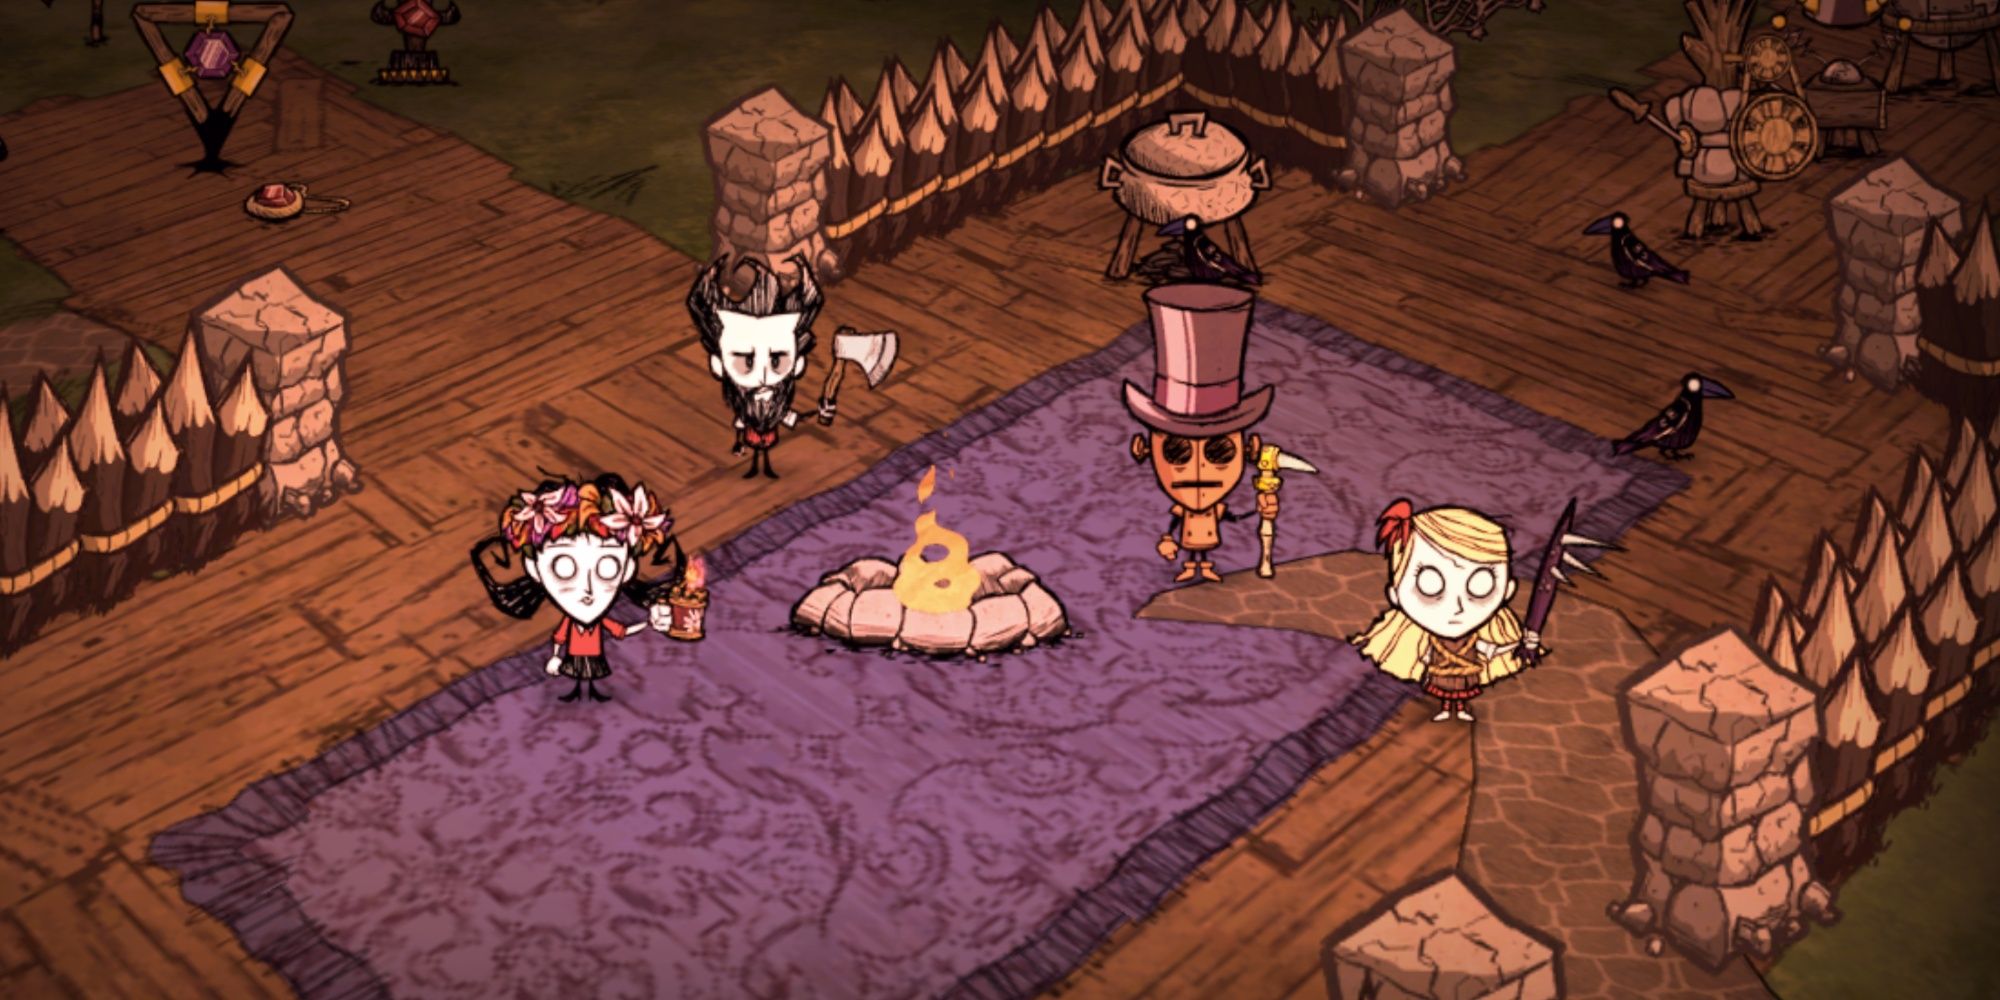 Wilson, WIllow, WX-78, Wendy in Don't Starve Together